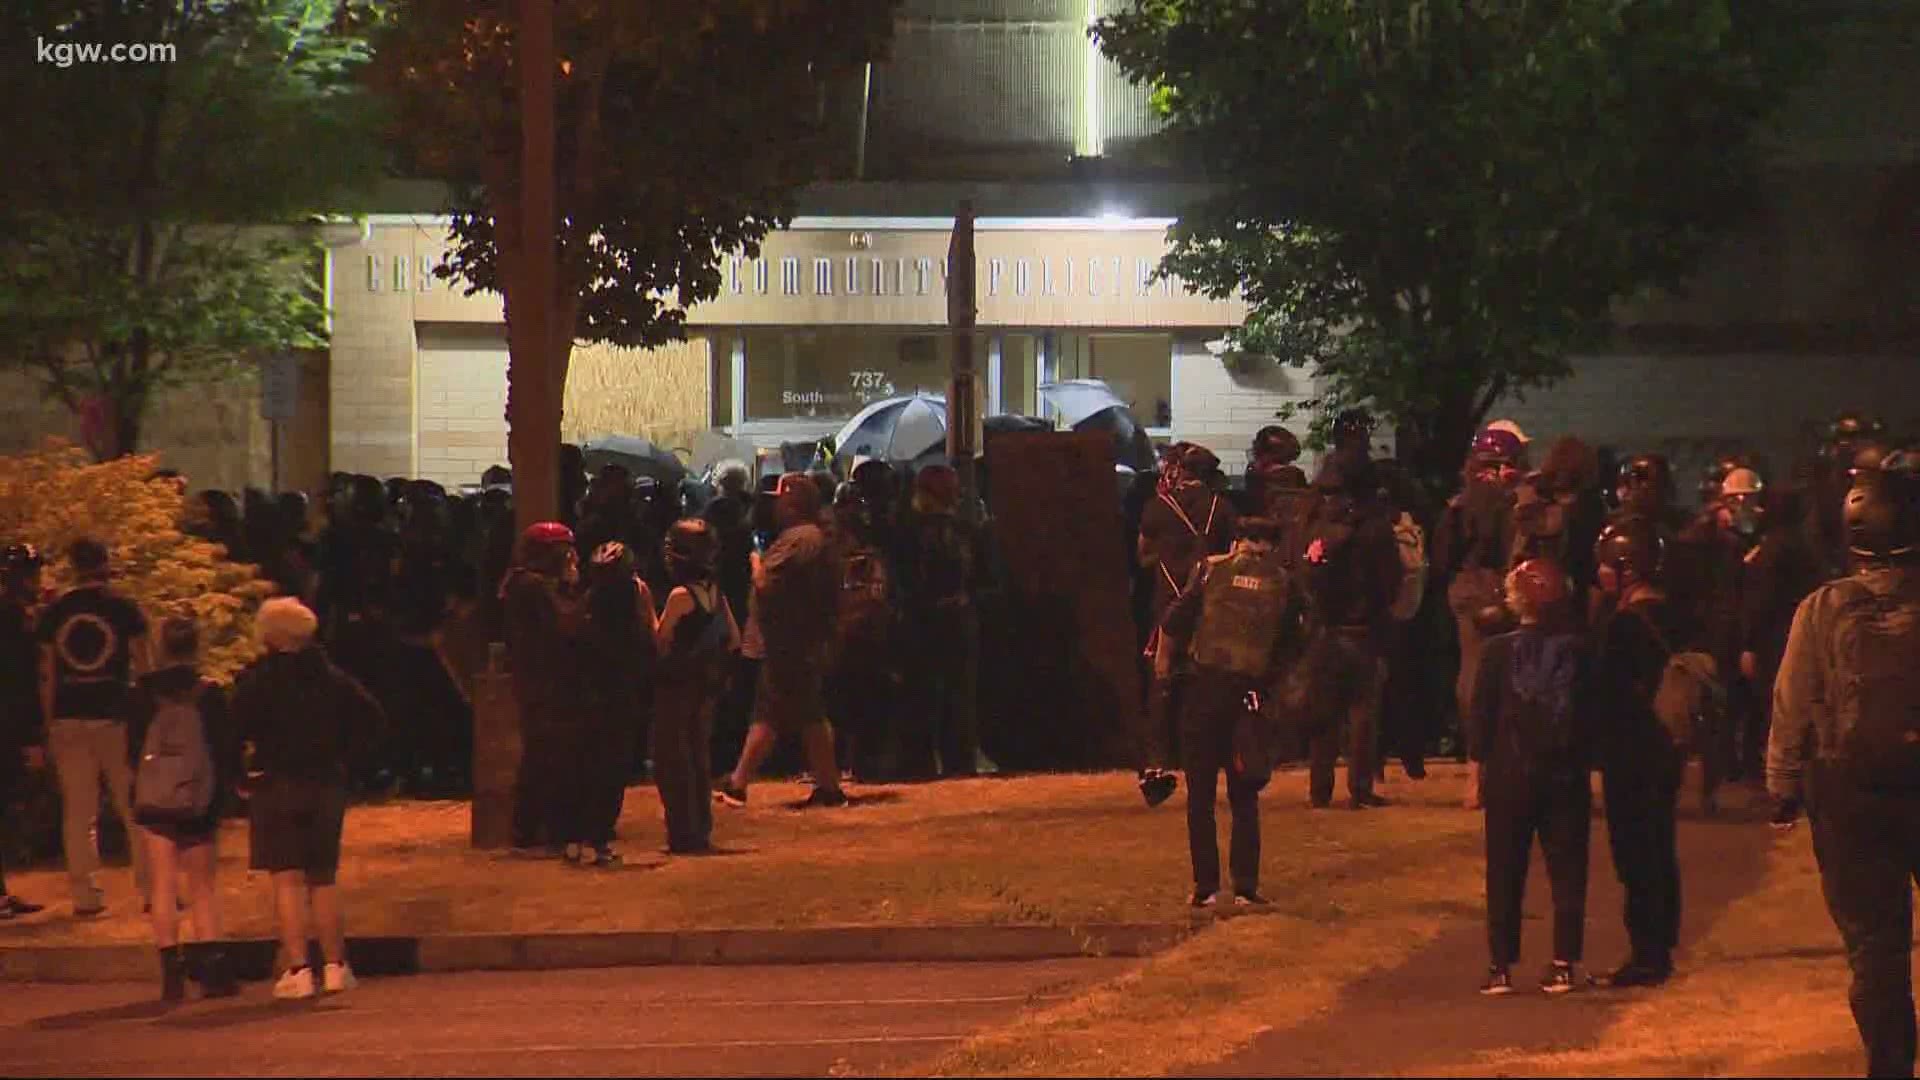 Portland Mayor Ted Wheeler said people tried to burn down the East Precinct while dozens of officers and civilians were trapped inside.